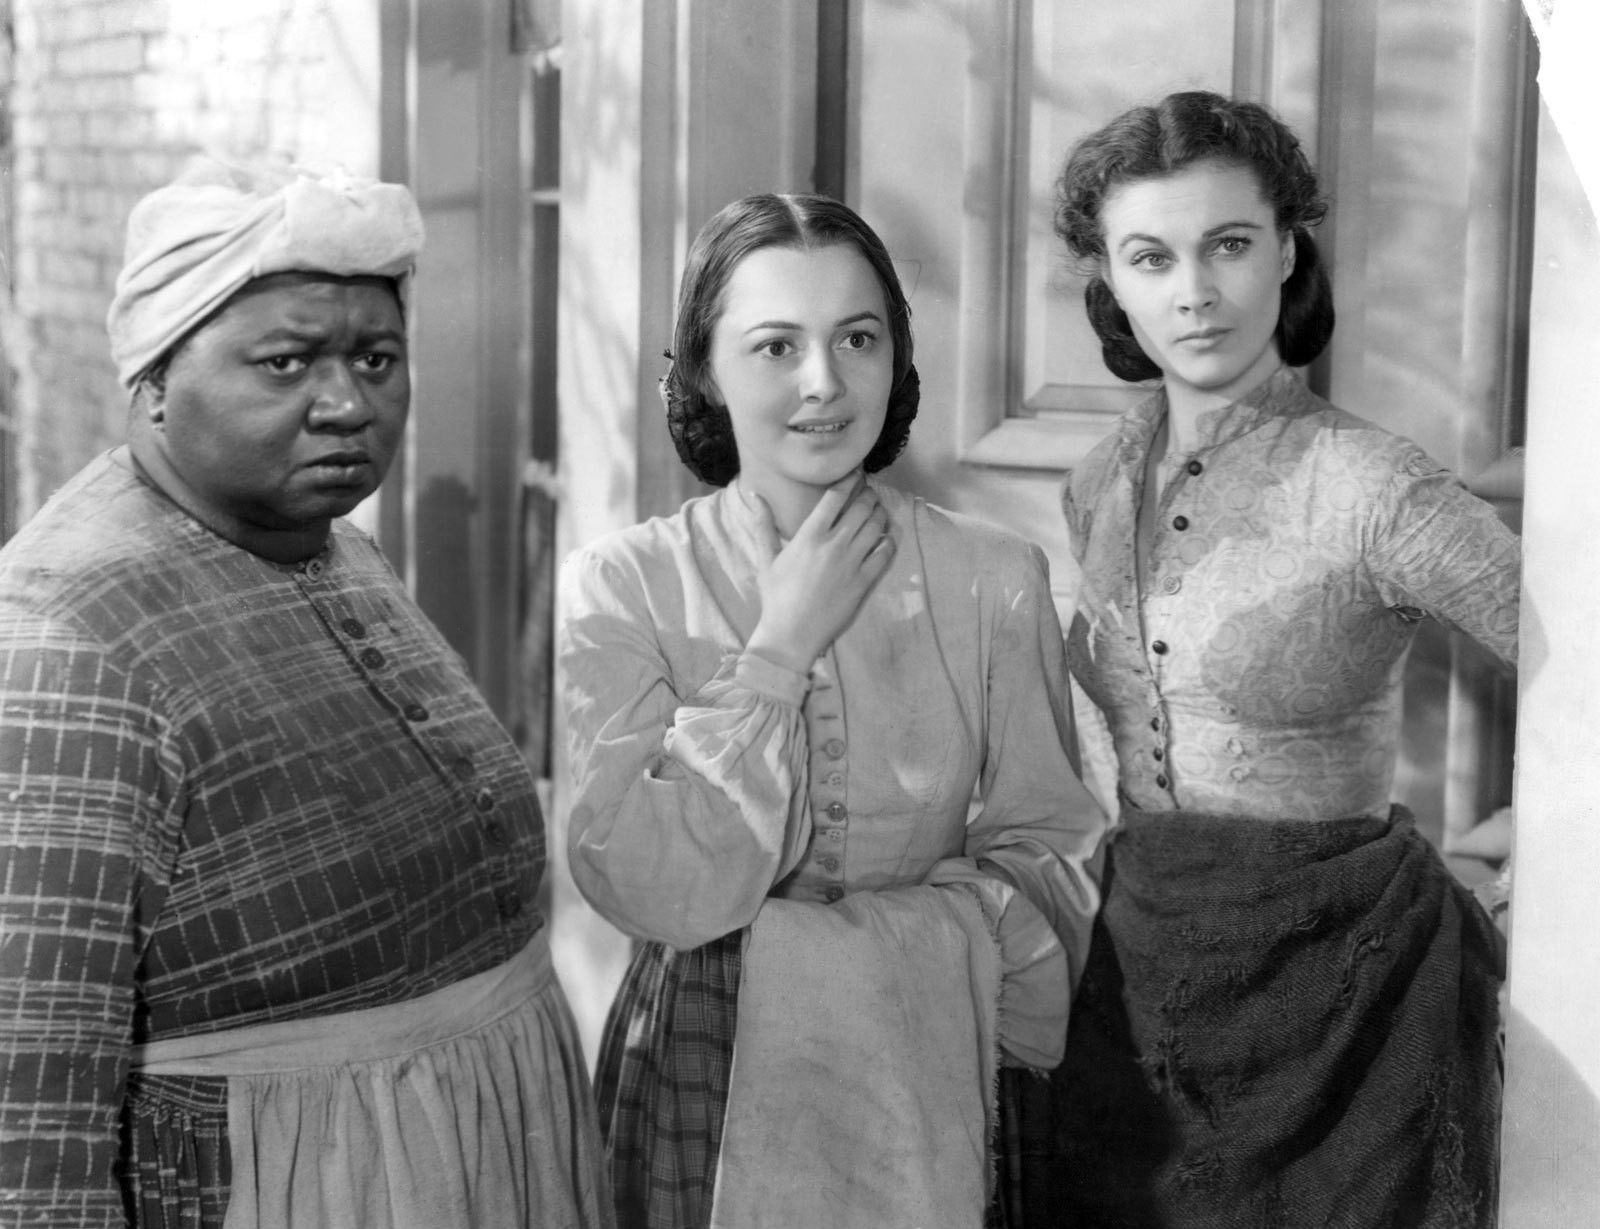 Publicity photo for "Gone with the Wind" with Hattie McDaniel, Olivia de Havilland and Vivien Leigh. | Source: Wikimedia Commons Images, Public Domain